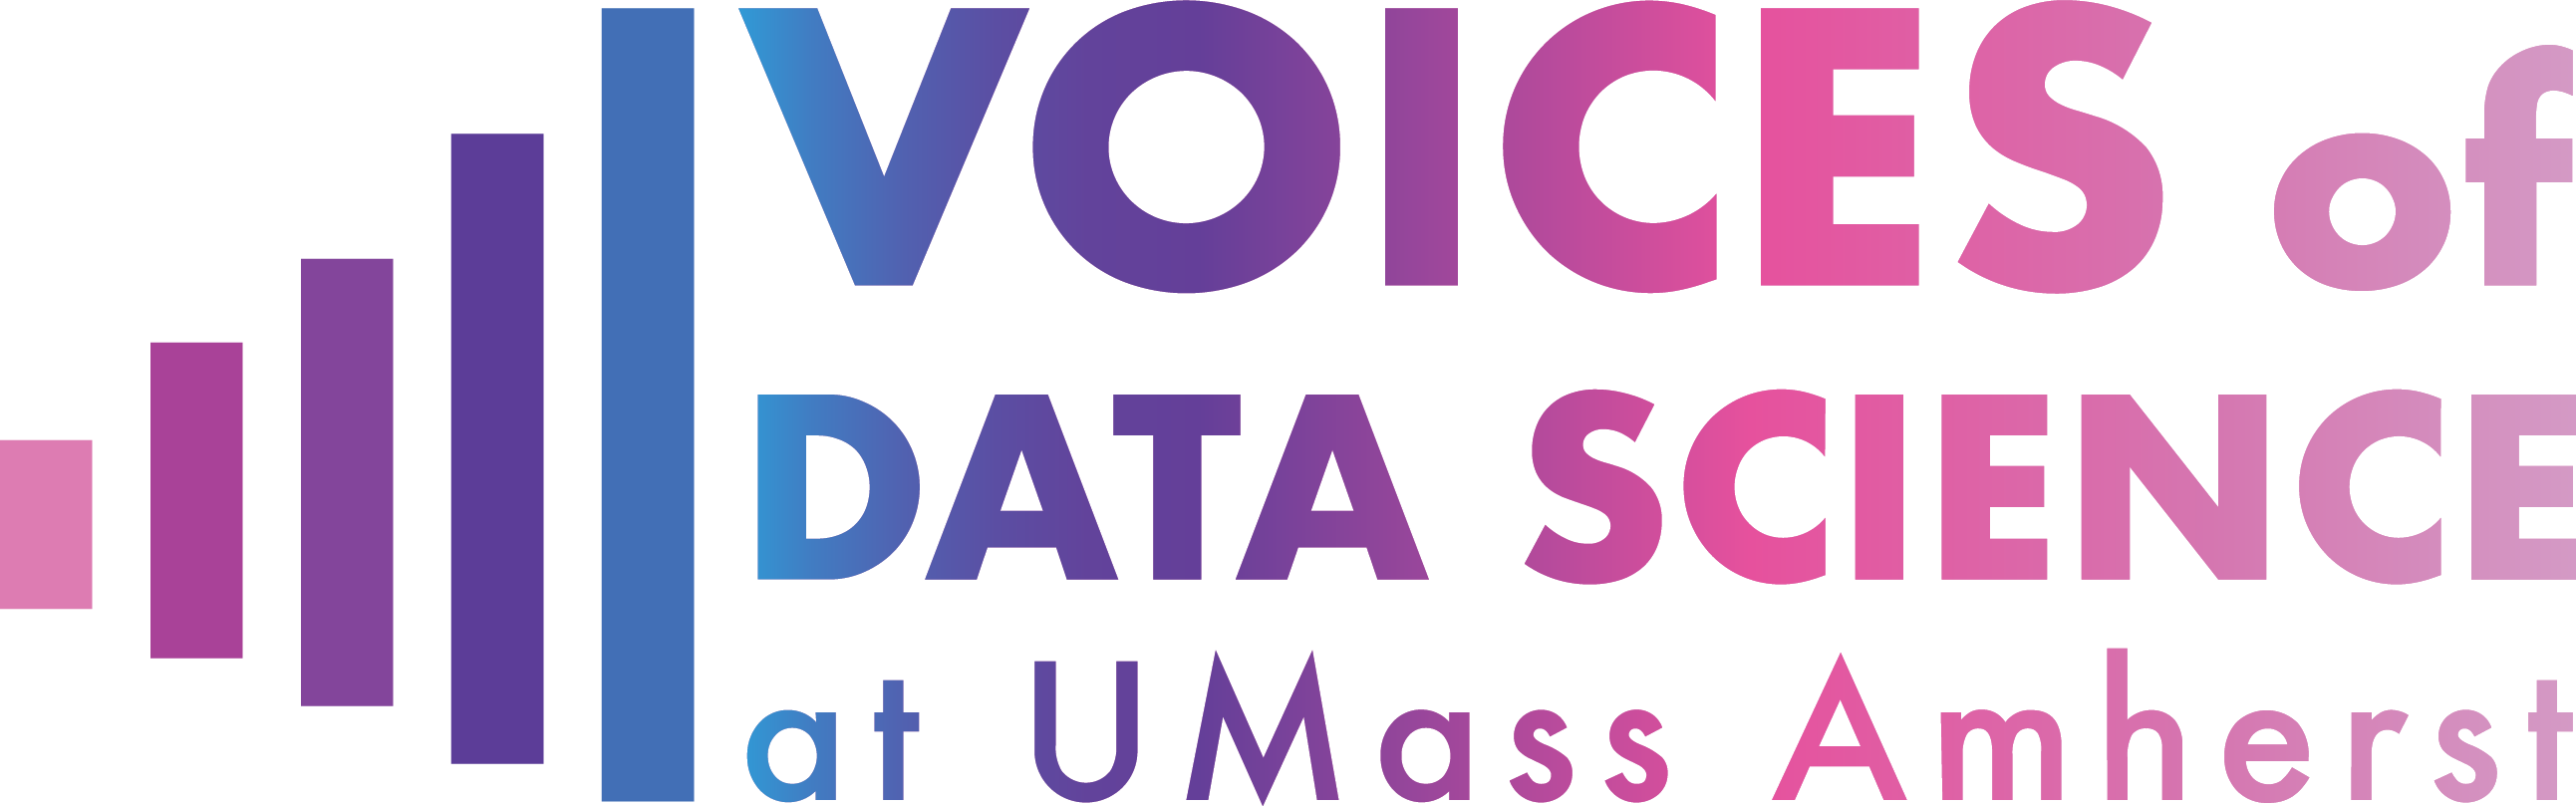 Voices of Data Science at UMass Amherst